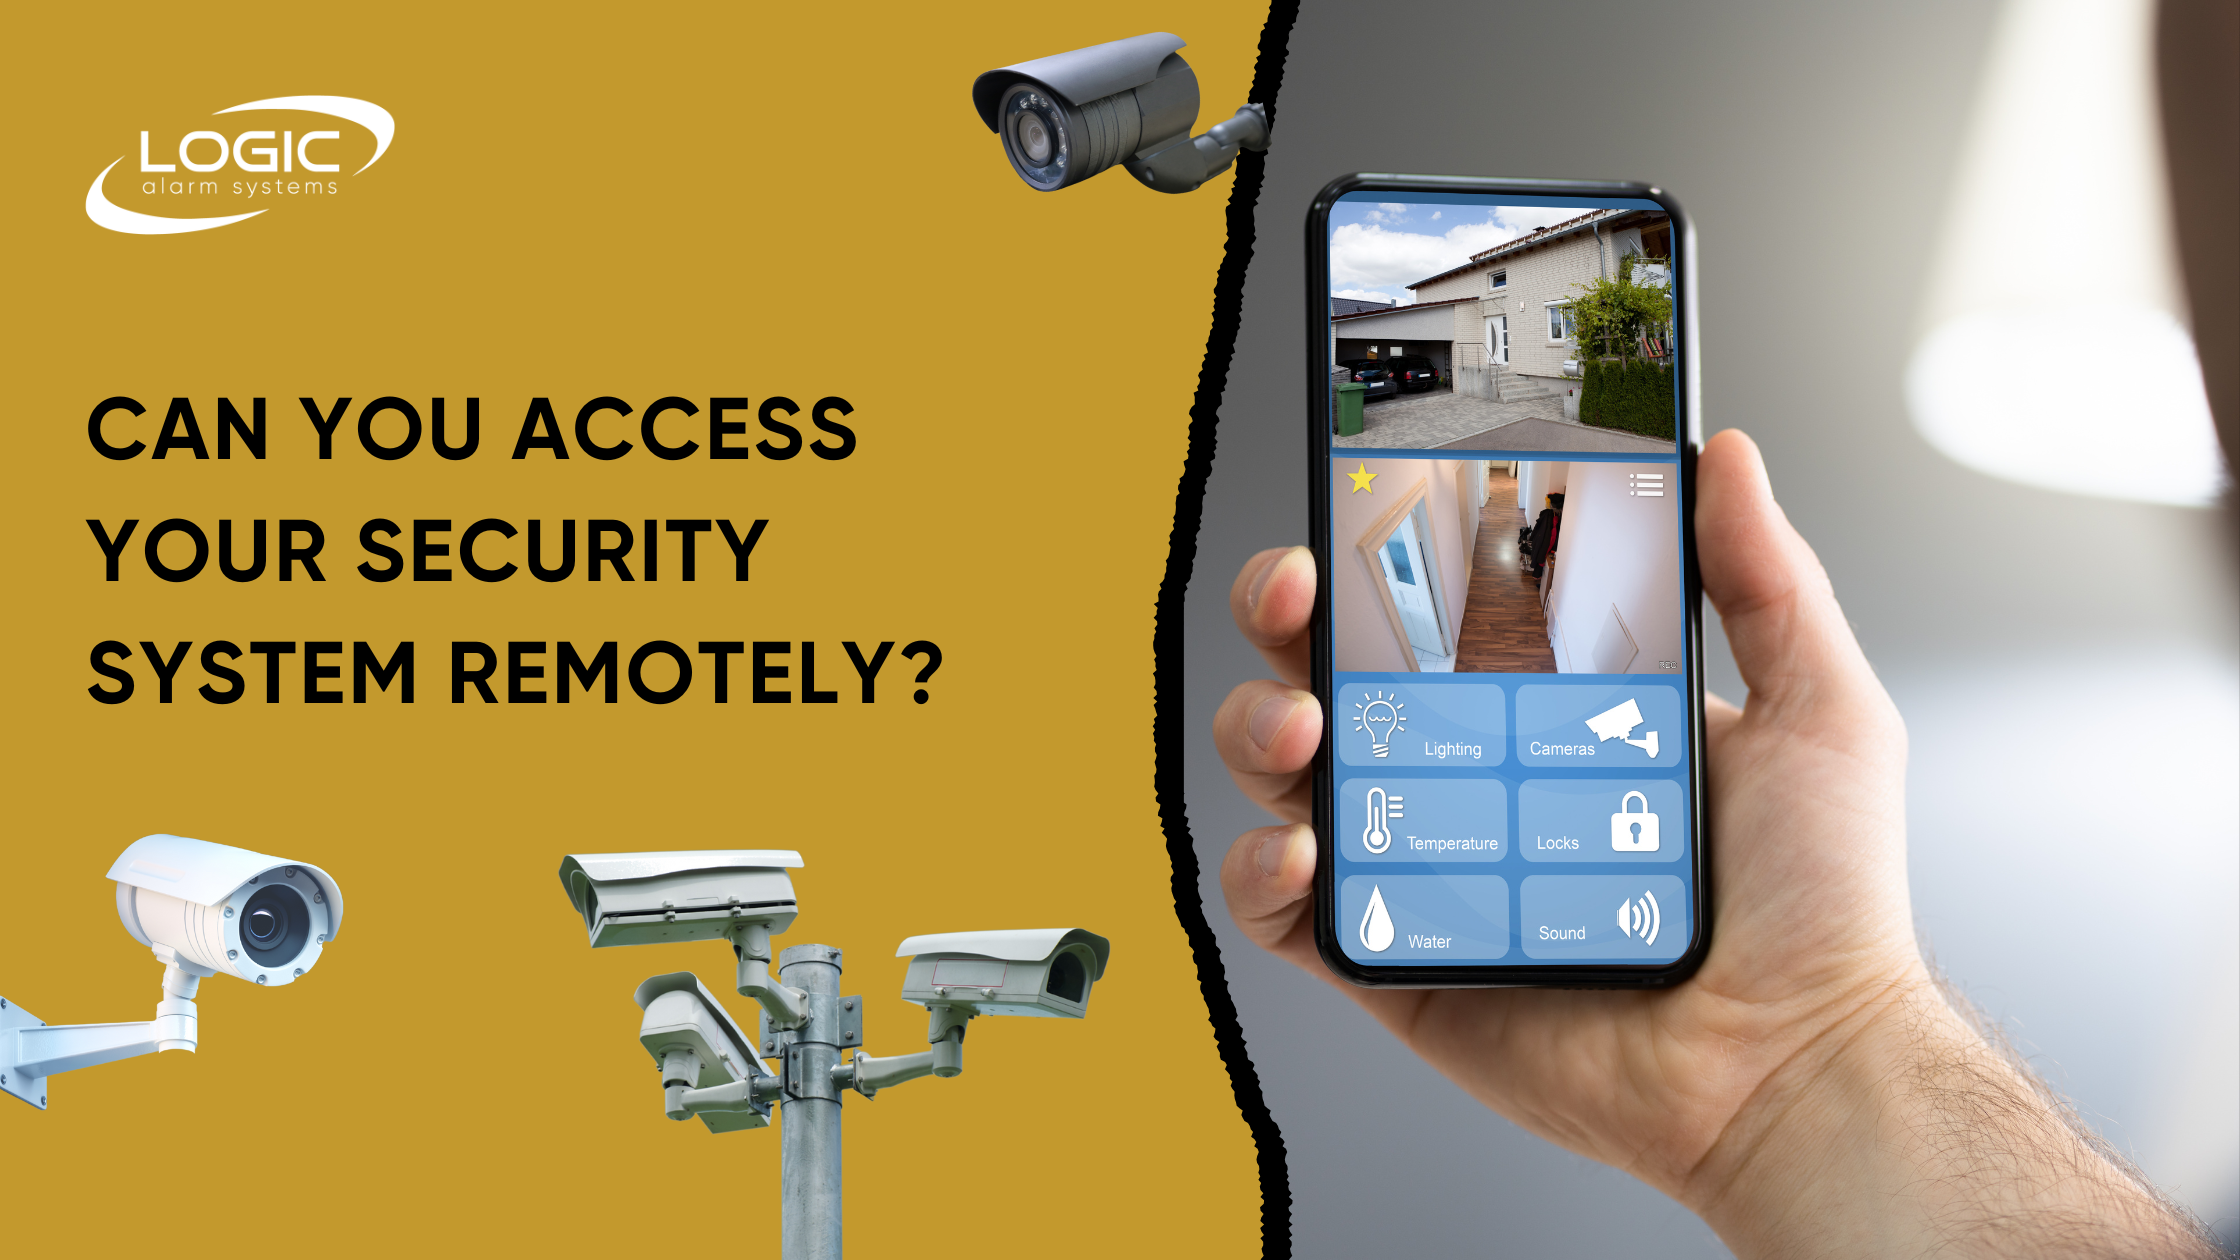 Image of someone holding a mobile phone with an app open that allows them to monitor CCTV and other security systems. The blog banner text says “Can You Access Your Security System Remotely?” and there are images of a few CCTV cameras.